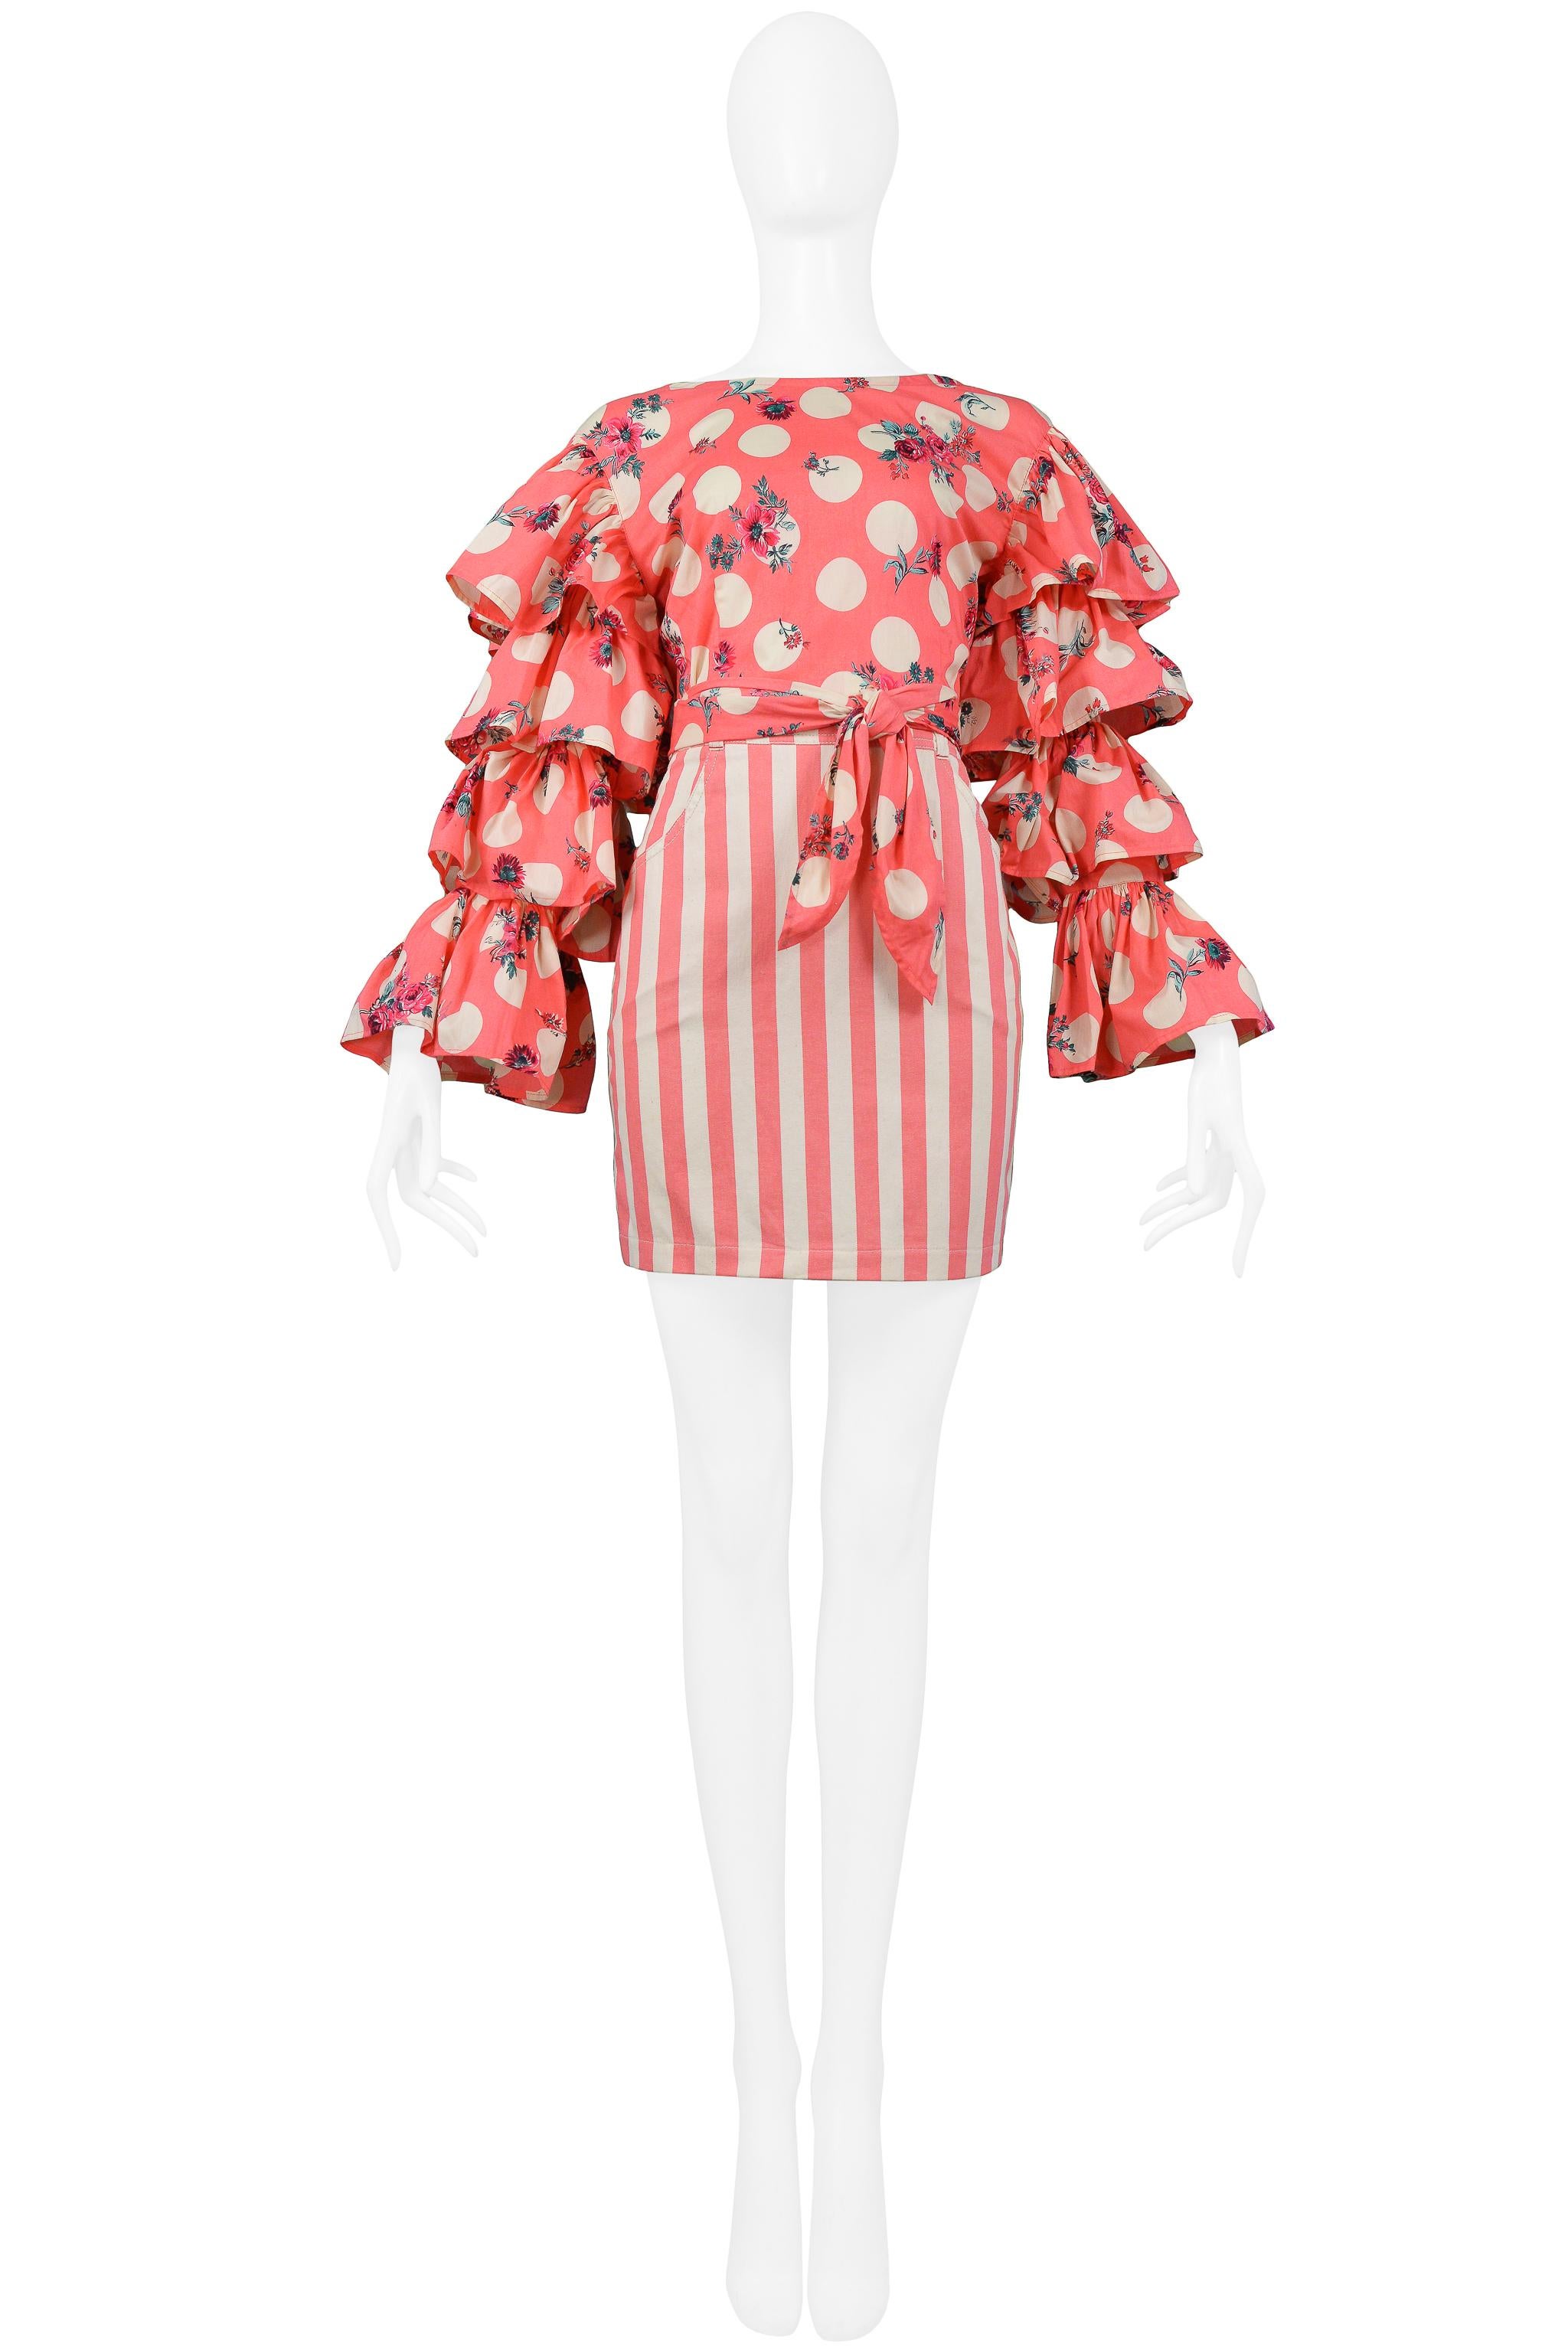 Resurrection Vintage is excited to offer a vintage Byblos hot pink and cream polka dot and floral print Byblos cotton wrap top with ruffled sleeves and matching pink and cream stripe skirt with center zipper and button closure. 

Byblos
Designed by